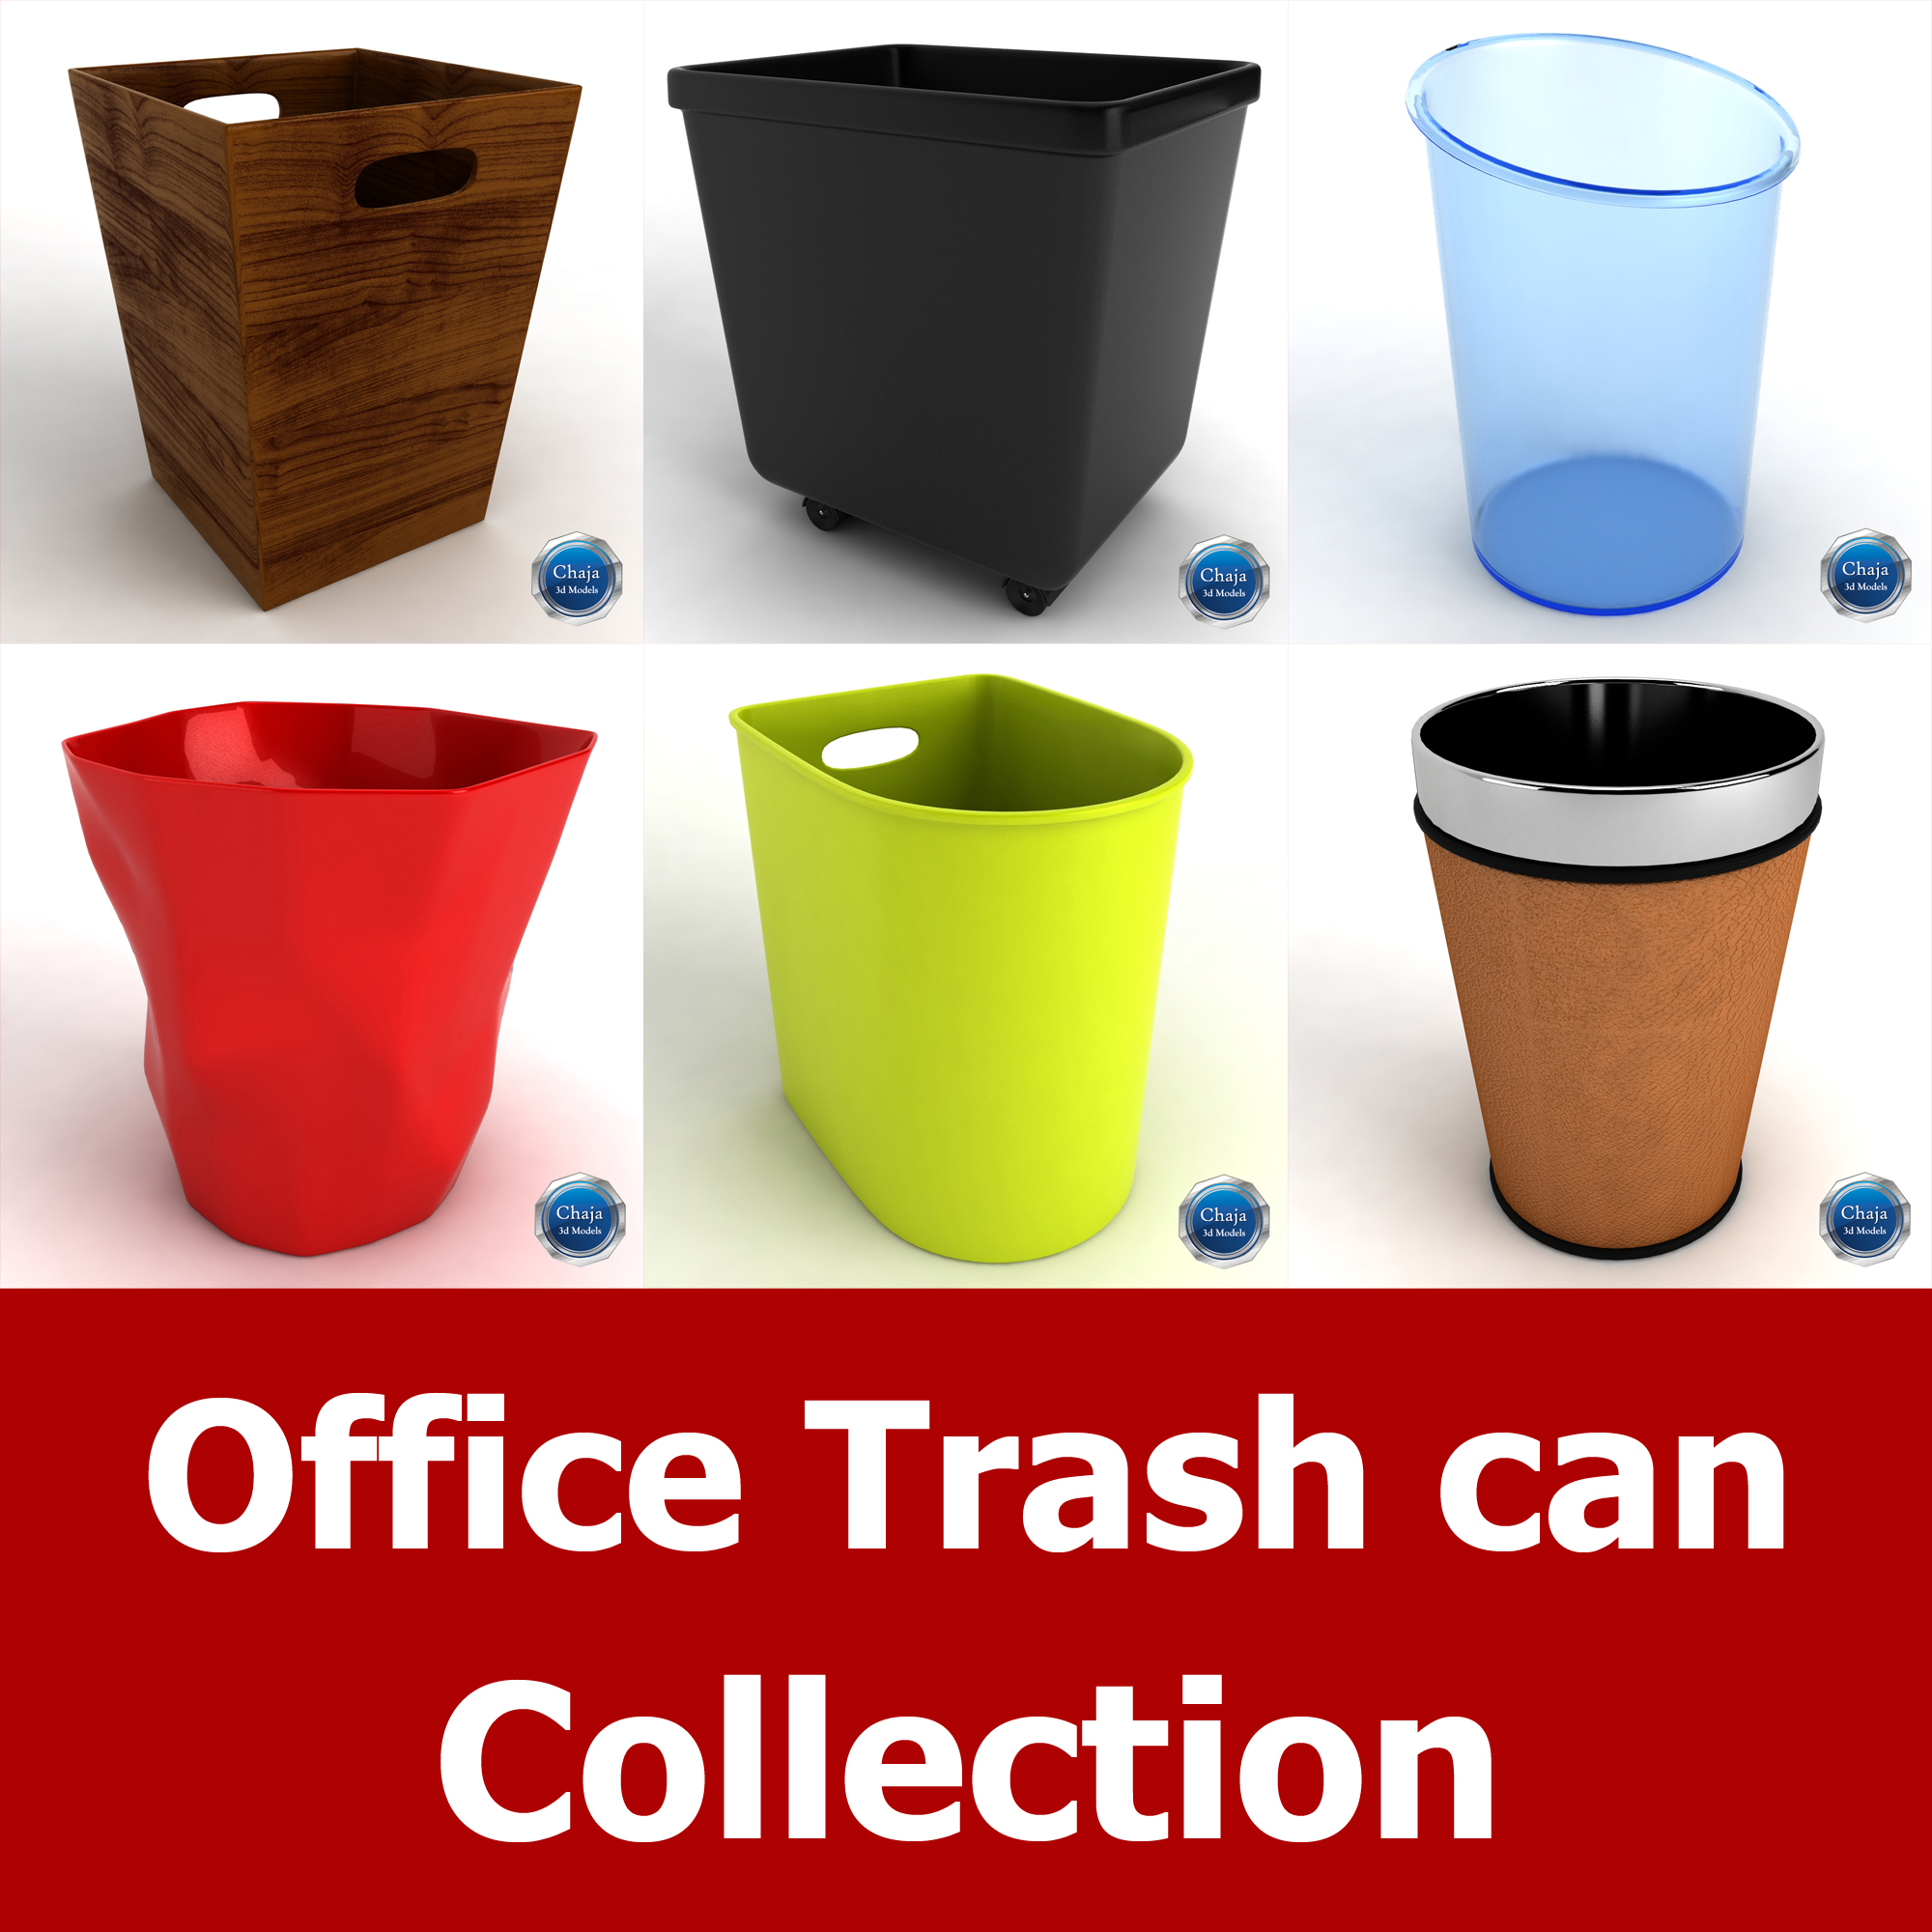 1 Office Trash Can Collection 01 00e0cd77 D593 4eac B80e 2563783b8b25Zoom 